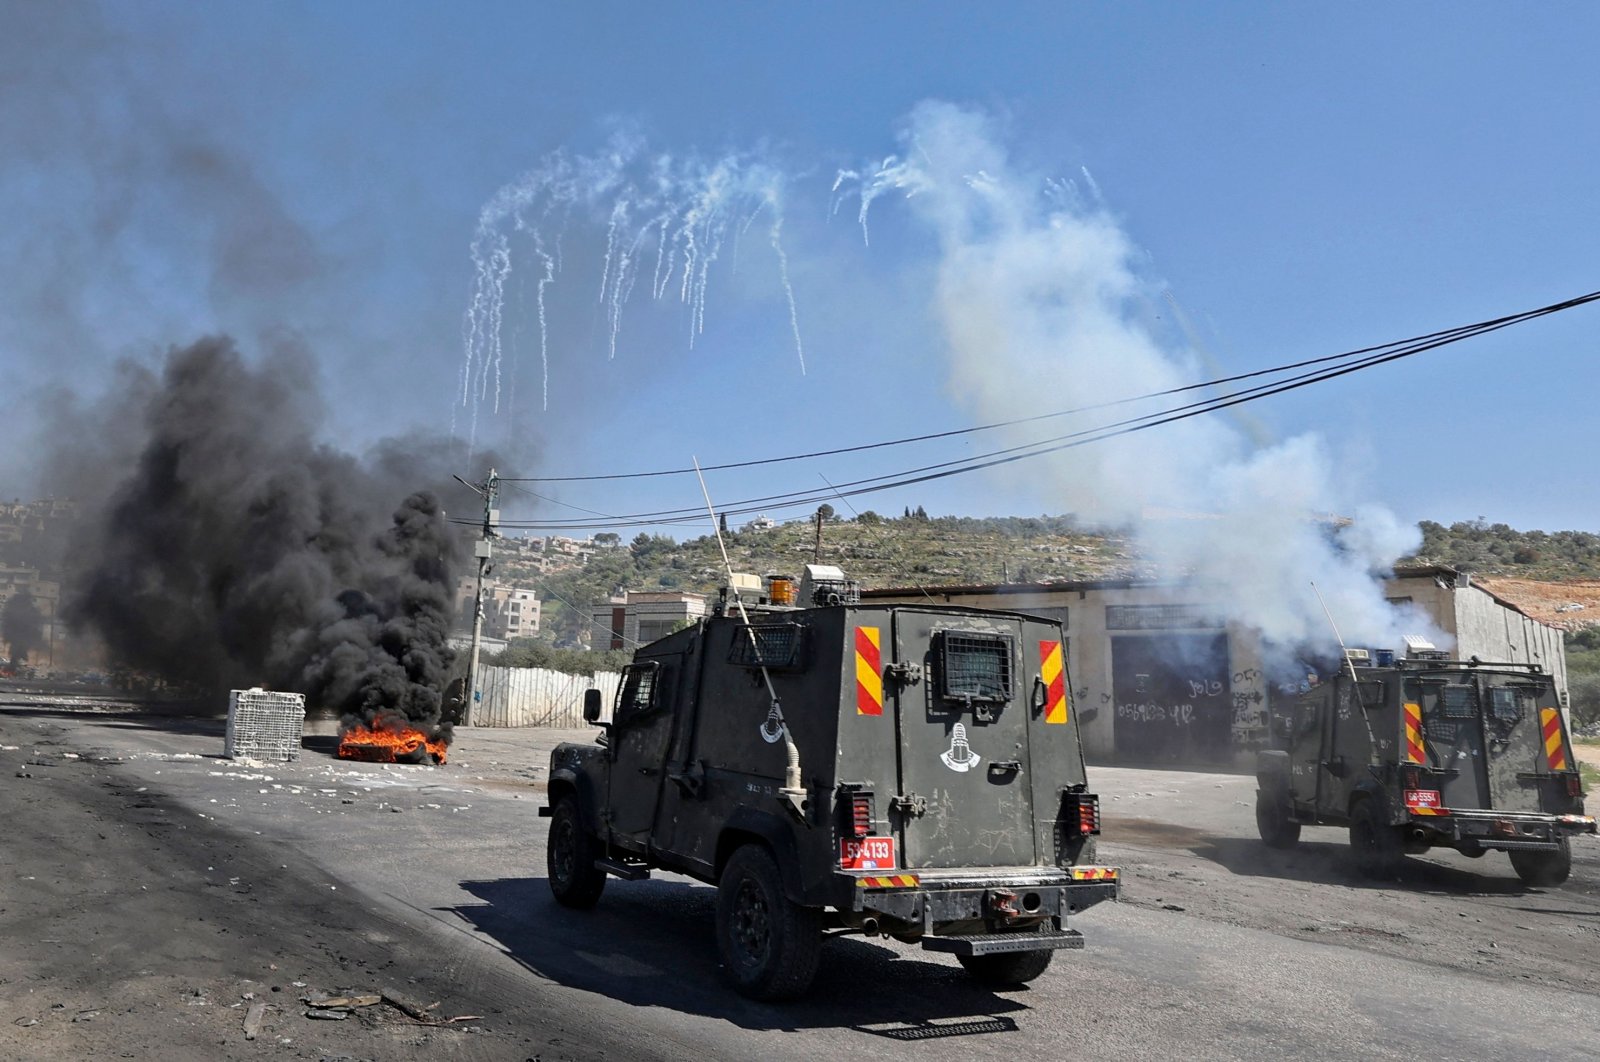 Israeli security members fire tear gas from vehicles amid clashes with Palestinian protesters during a demonstration against Jewish settlements and in support of Jerusalem's Al-Aqsa mosque, on the main street of Beita village in the occupied West Bank, on April 15, 2022. (AFP Photo)